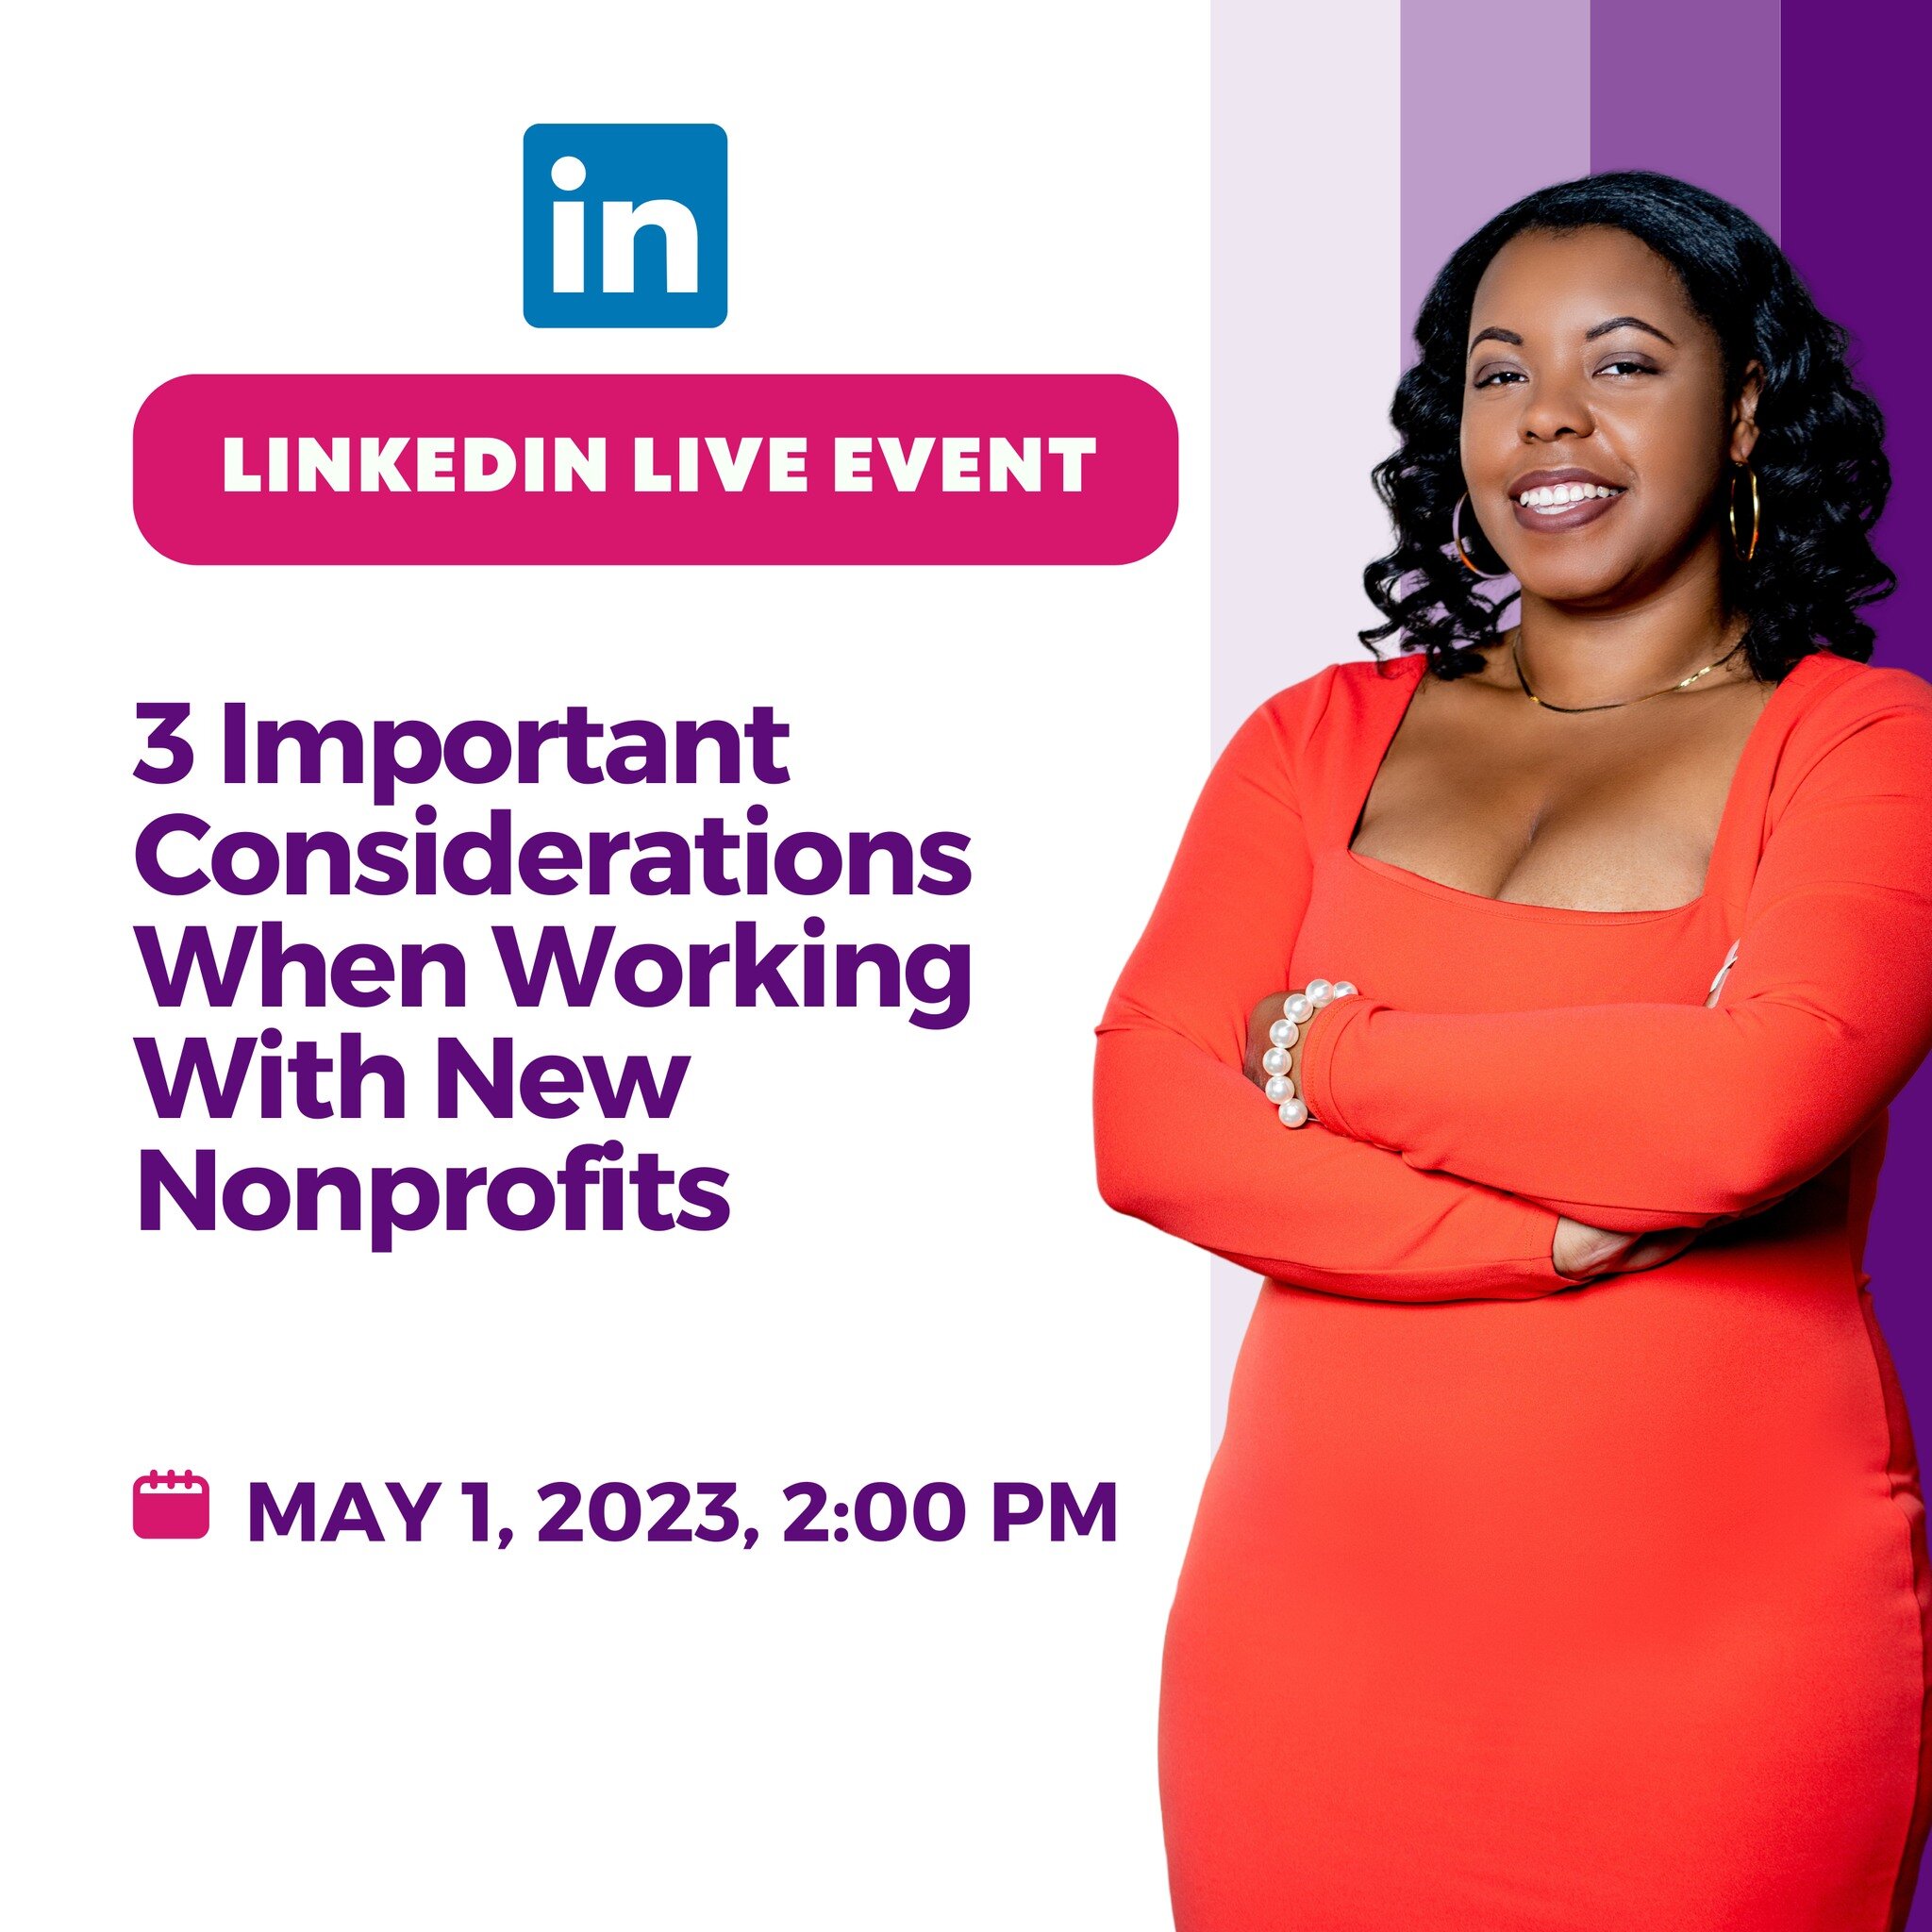 I'm taking over LinkedIn y'all! Join me today at 2pm EST as I share 3 important considerations that funders and supporters should keep in mind when working with new nonprofits.

This year, I'm being unapologetic about lifting up the stories and exper